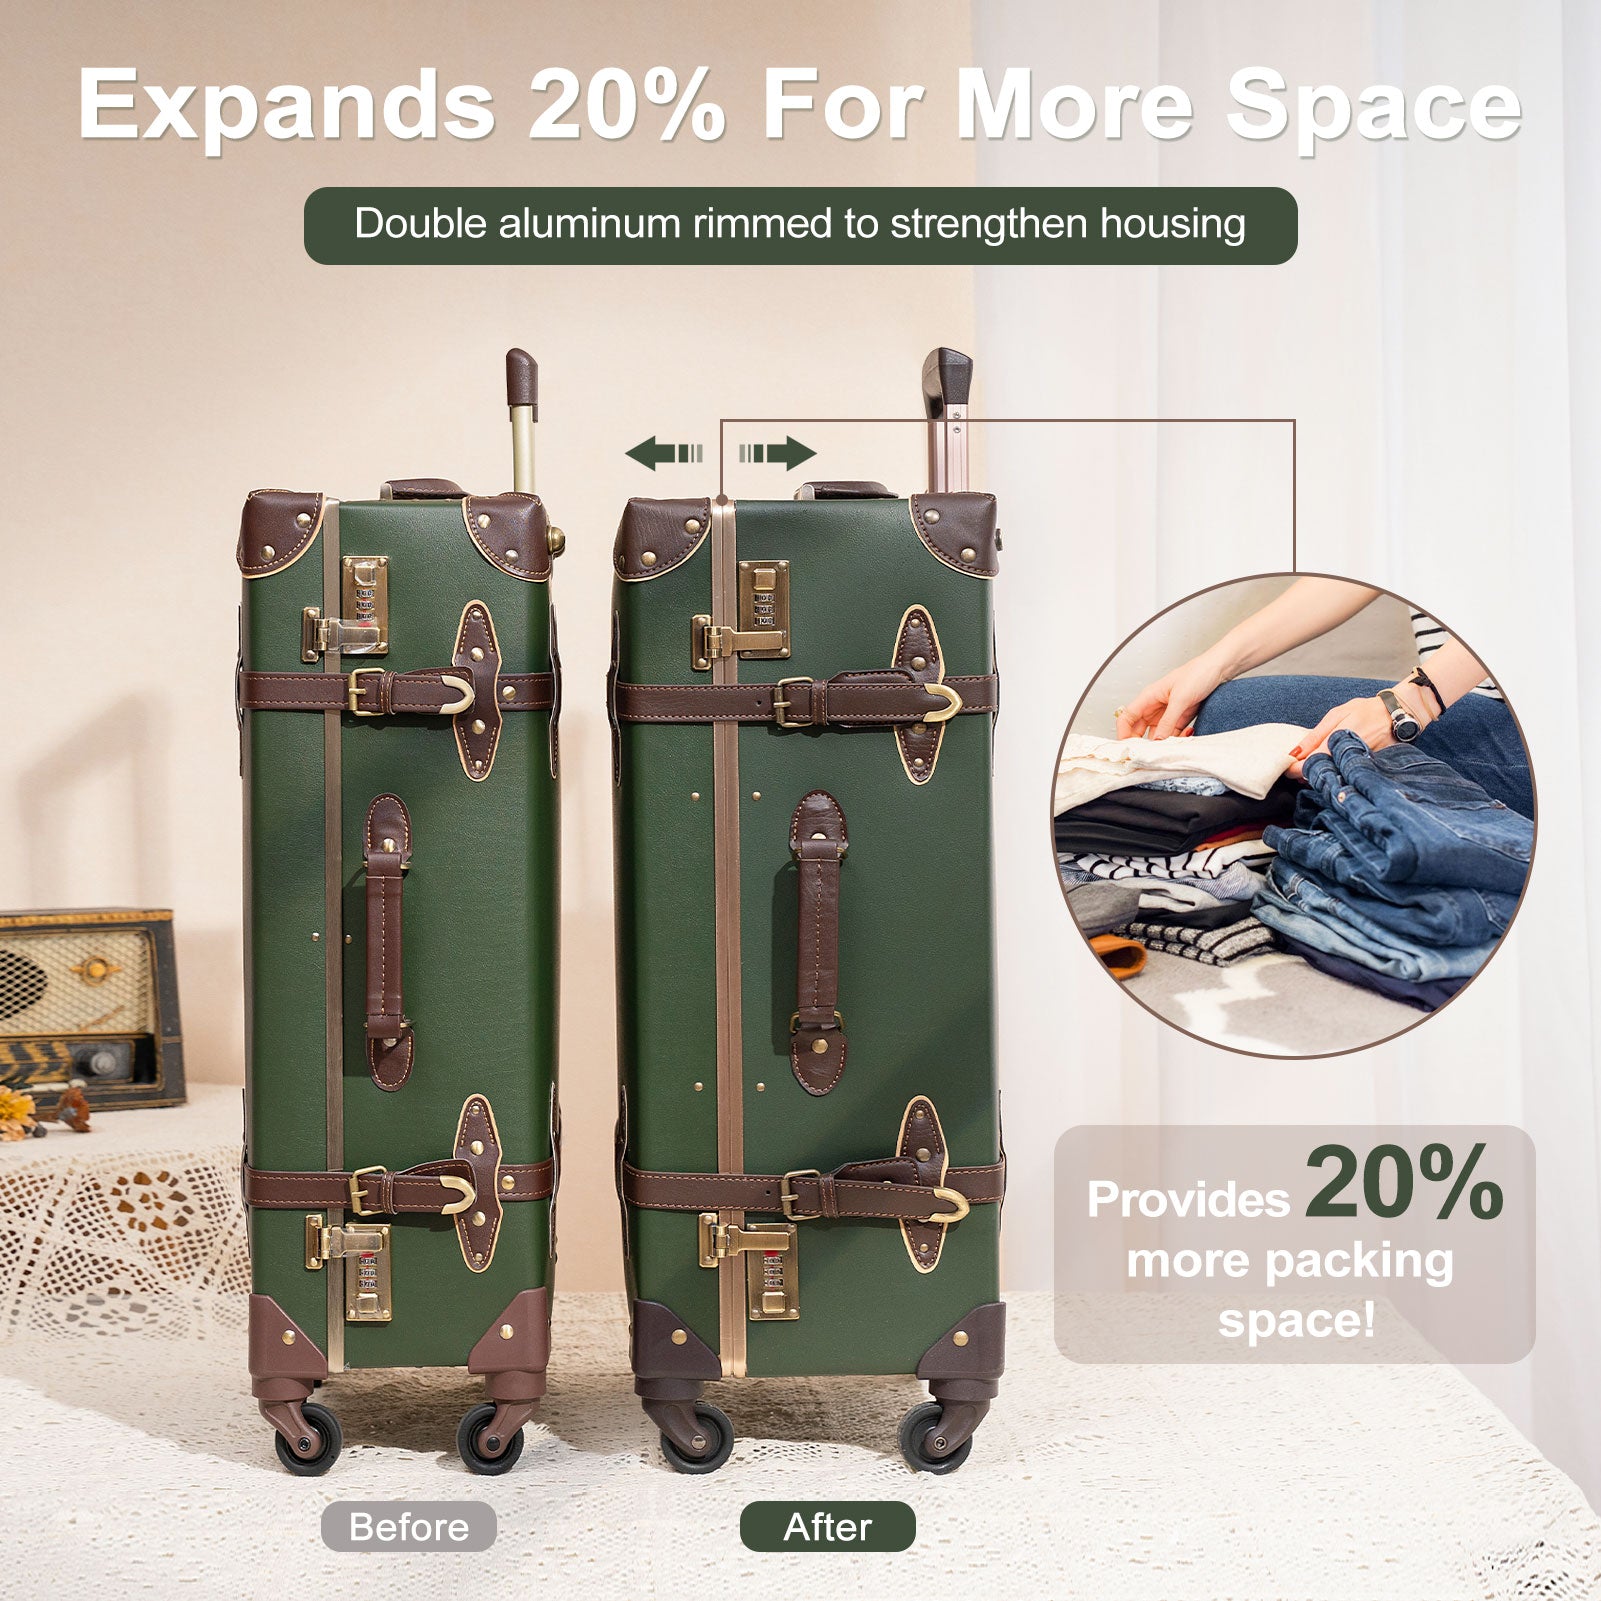 urecity Vintage Luggage Set of 2, Retro Suitcase Trunk with Wheels for Men  and Women, Cute Designer Travel Luggage Set with Boarding Tote